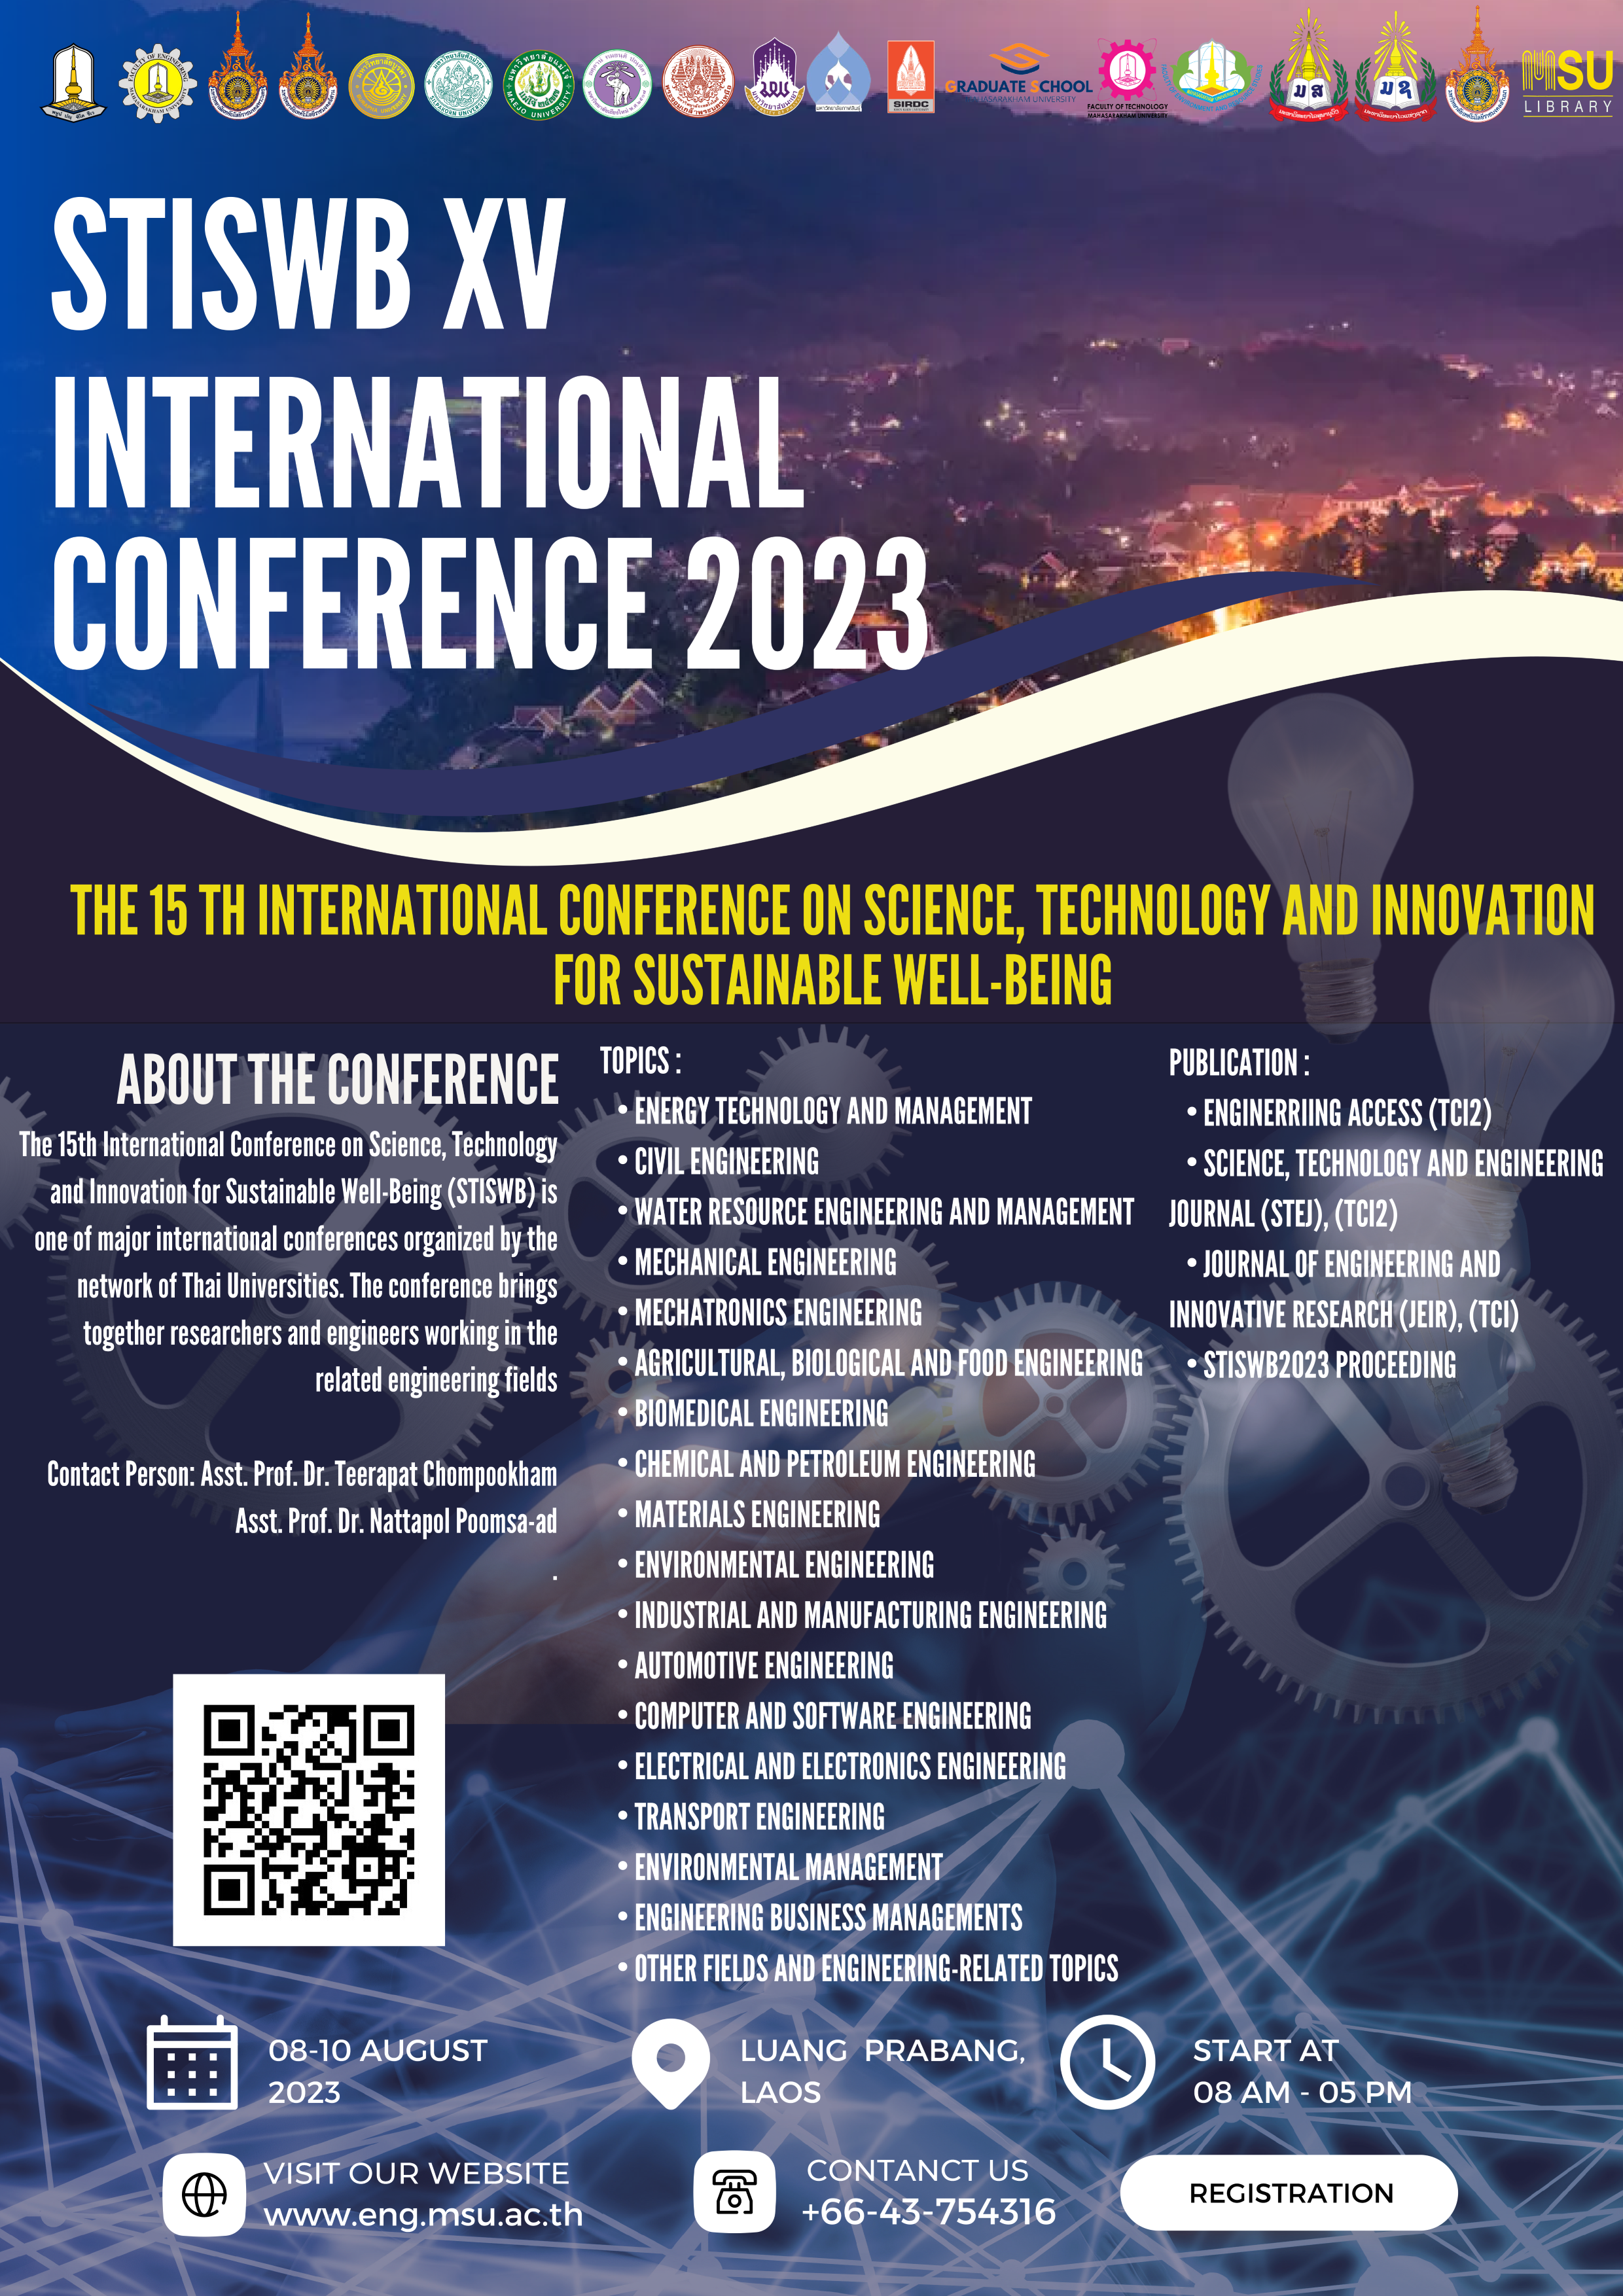 The 14th International Conference on Science